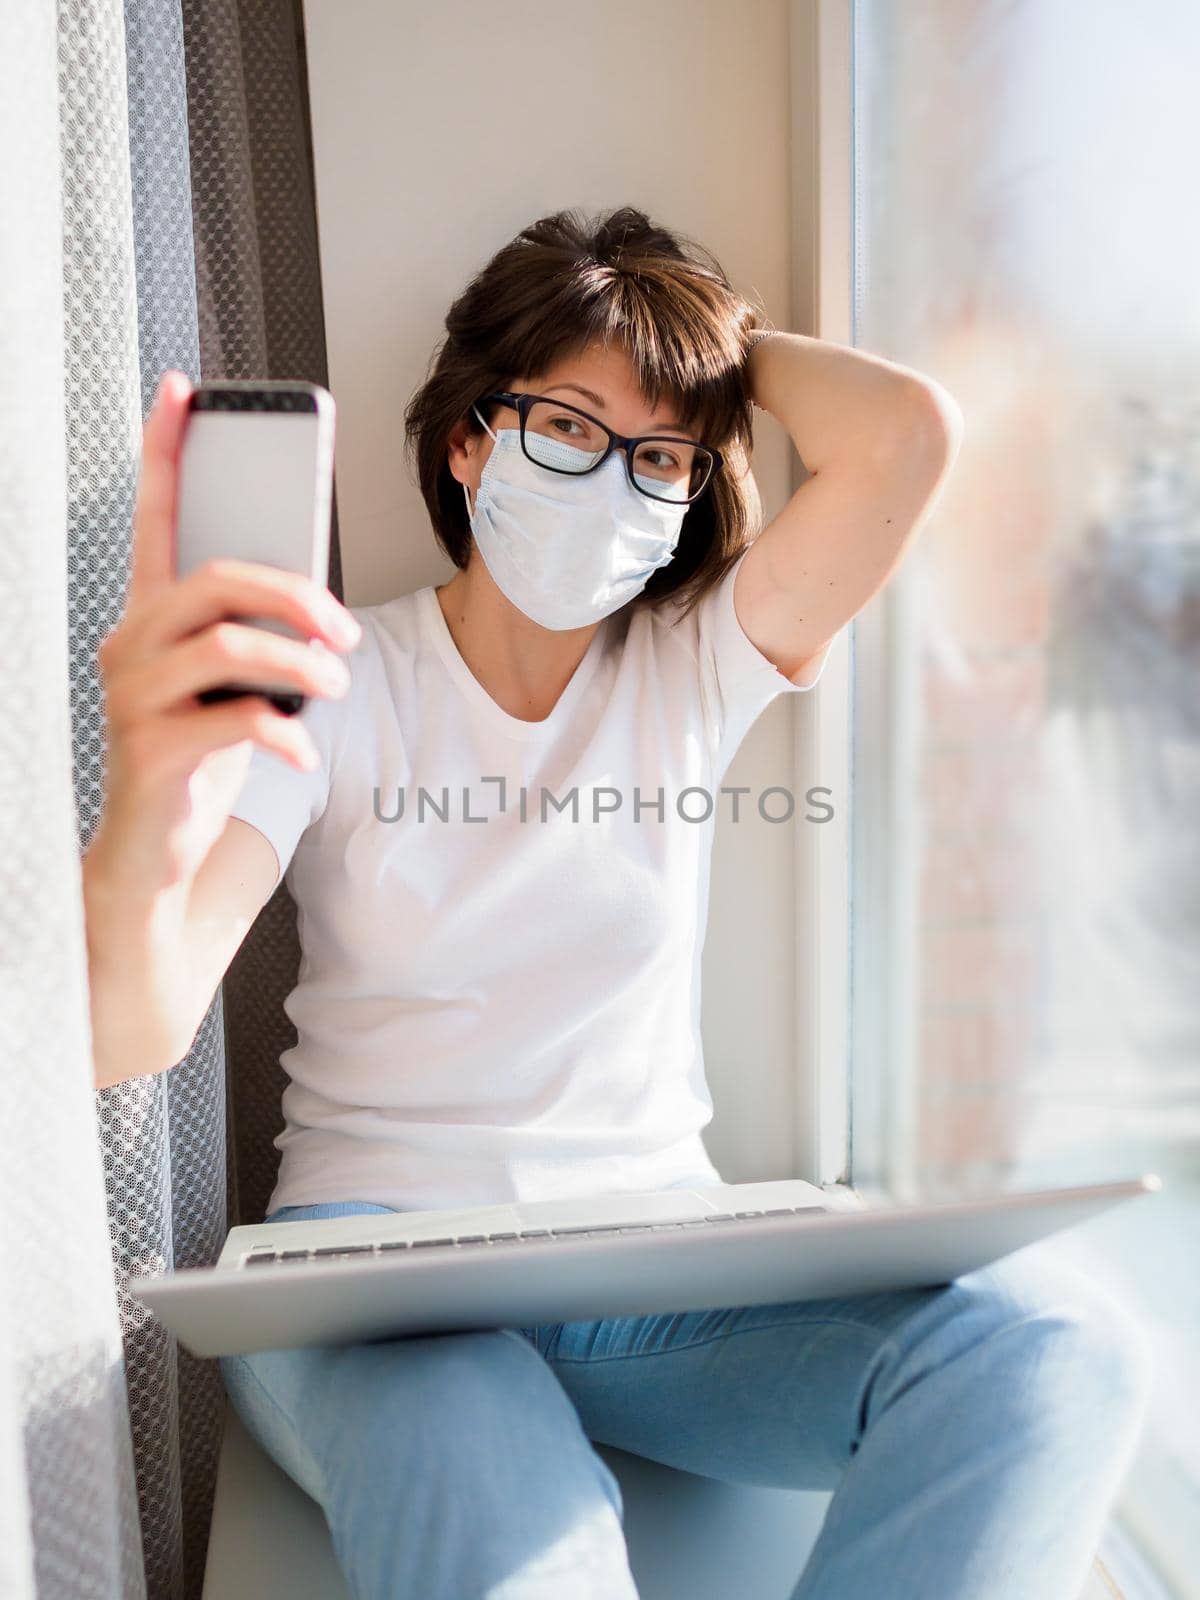 Pretty woman in medical mask remote works from home. She is making selfie on window sill with laptop on knees. Lockdown quarantine because of coronavirus COVID19. Self isolation at home.